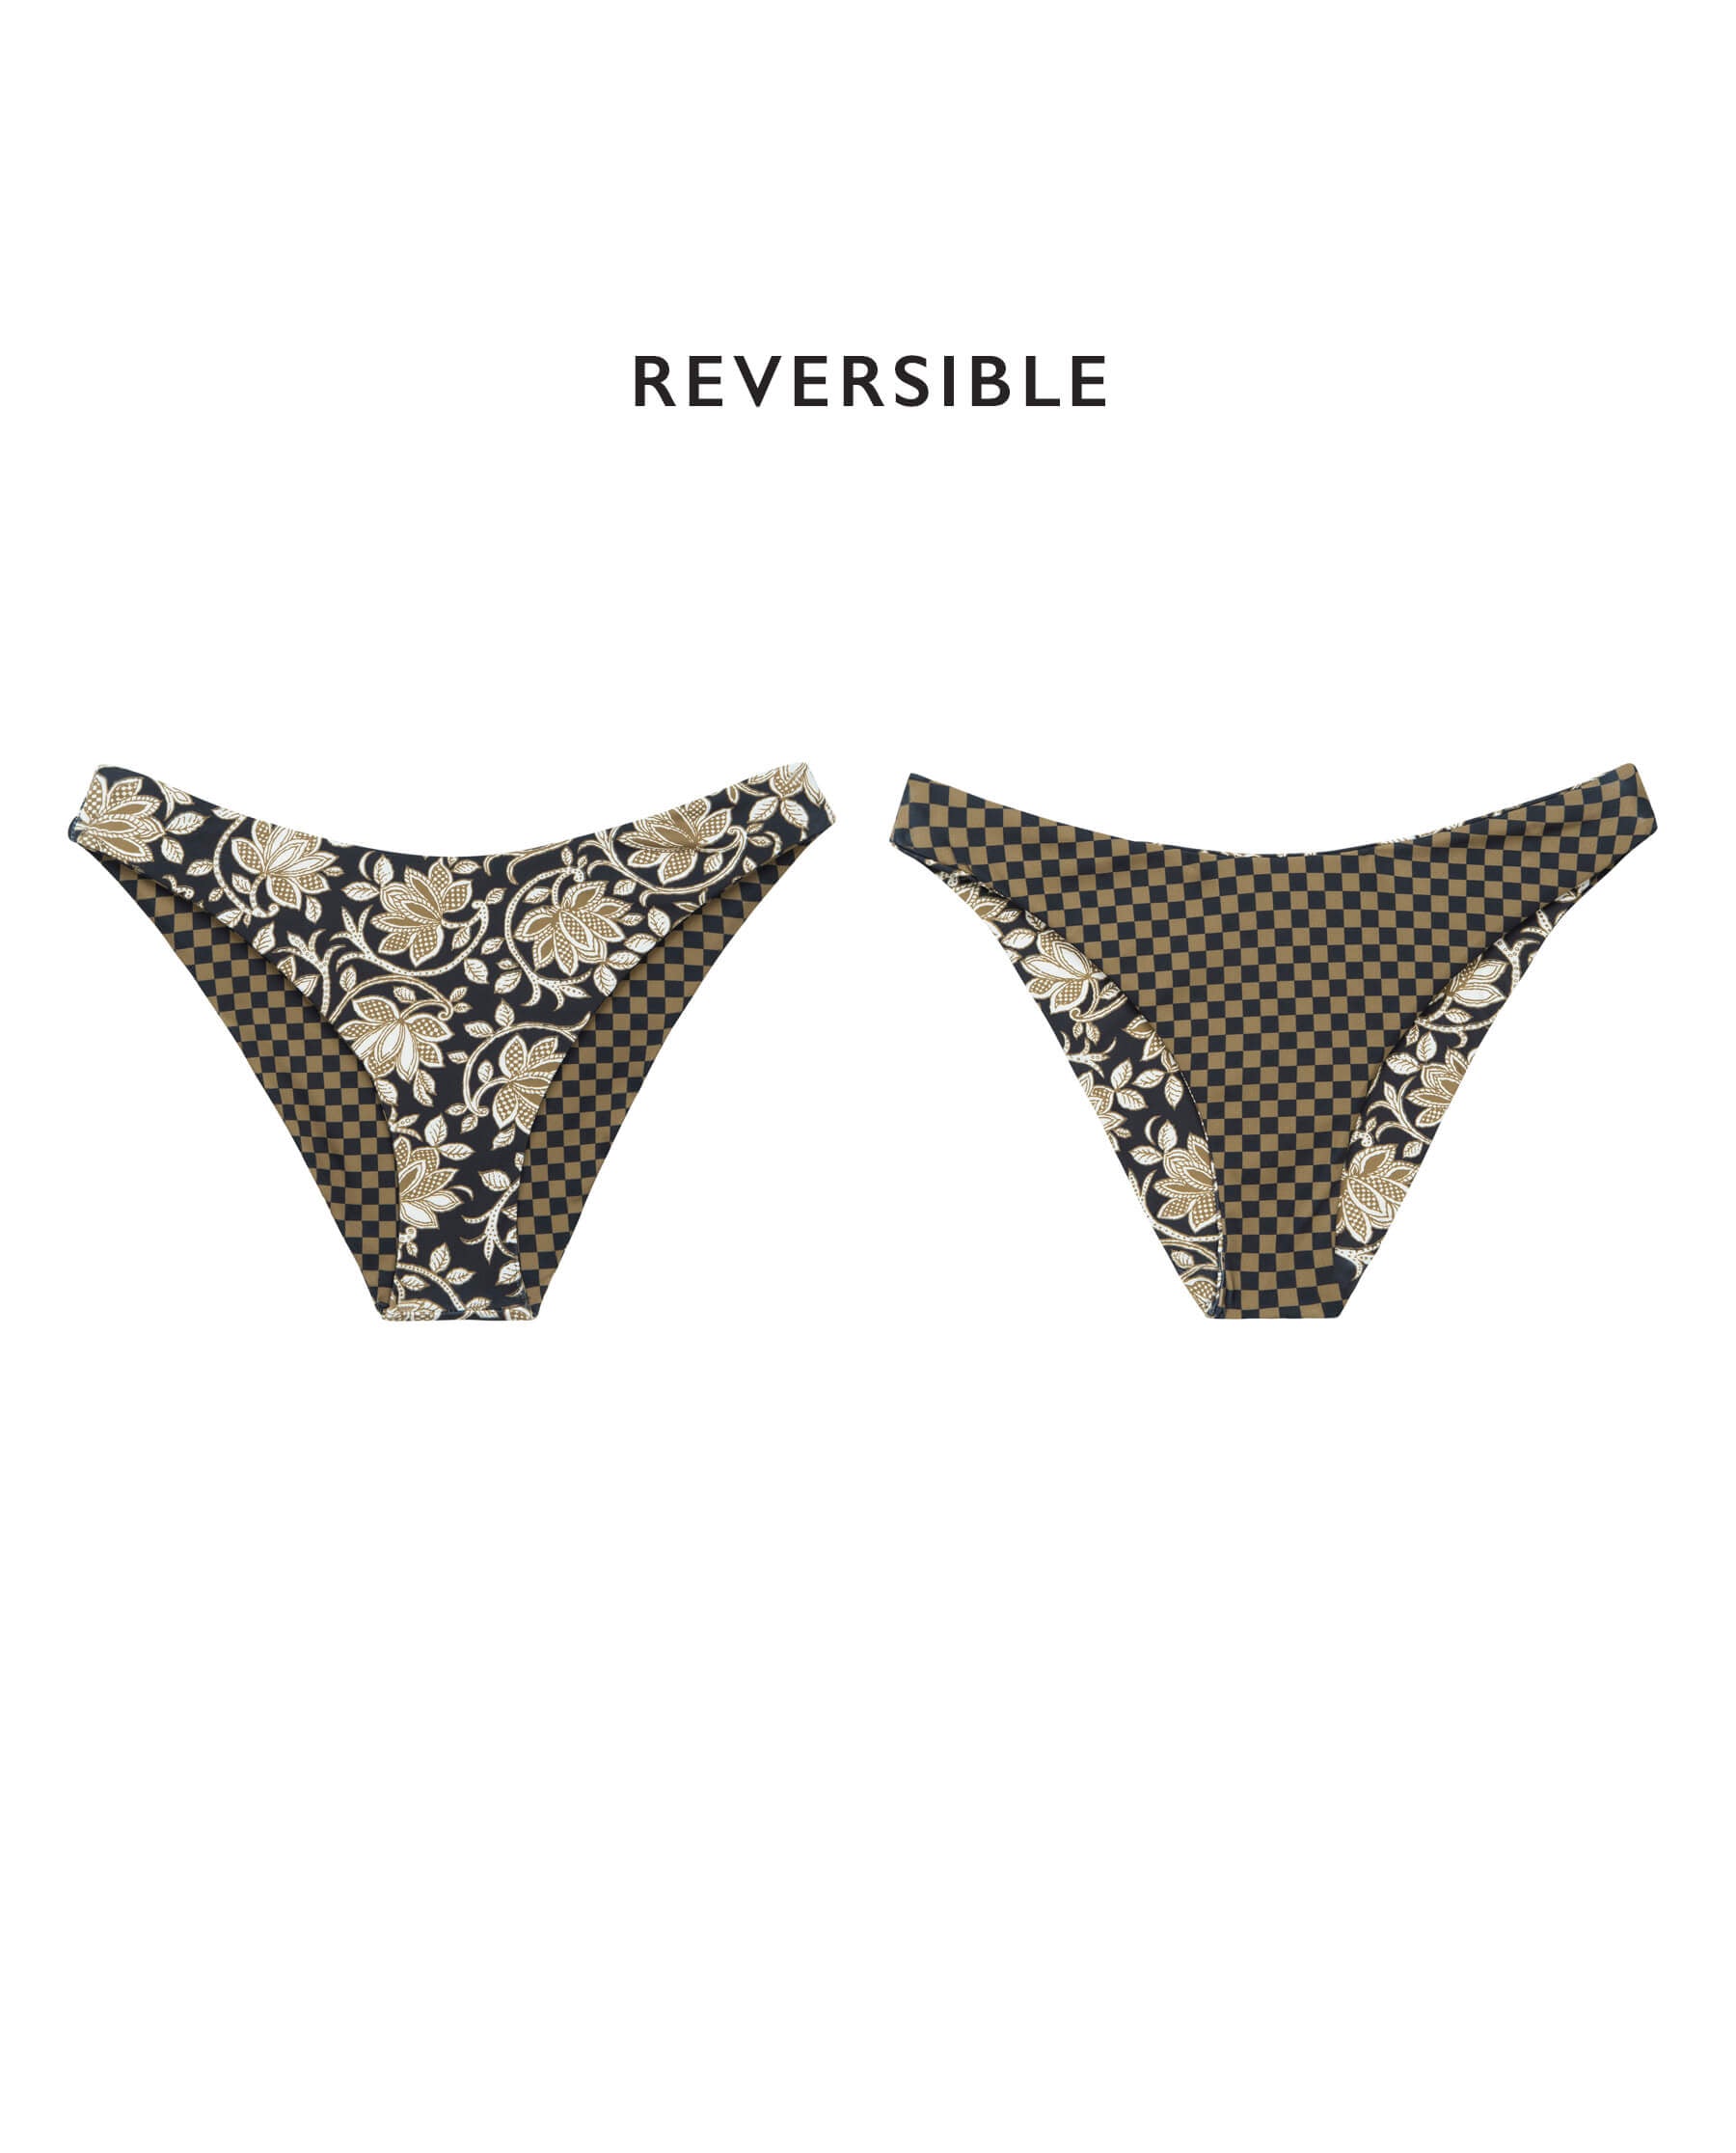 The Reversible Cheeky Brief. -- Black Oasis Floral and Bronze Check SWIM BOTTOMS THE GREAT. SP24 SWIM